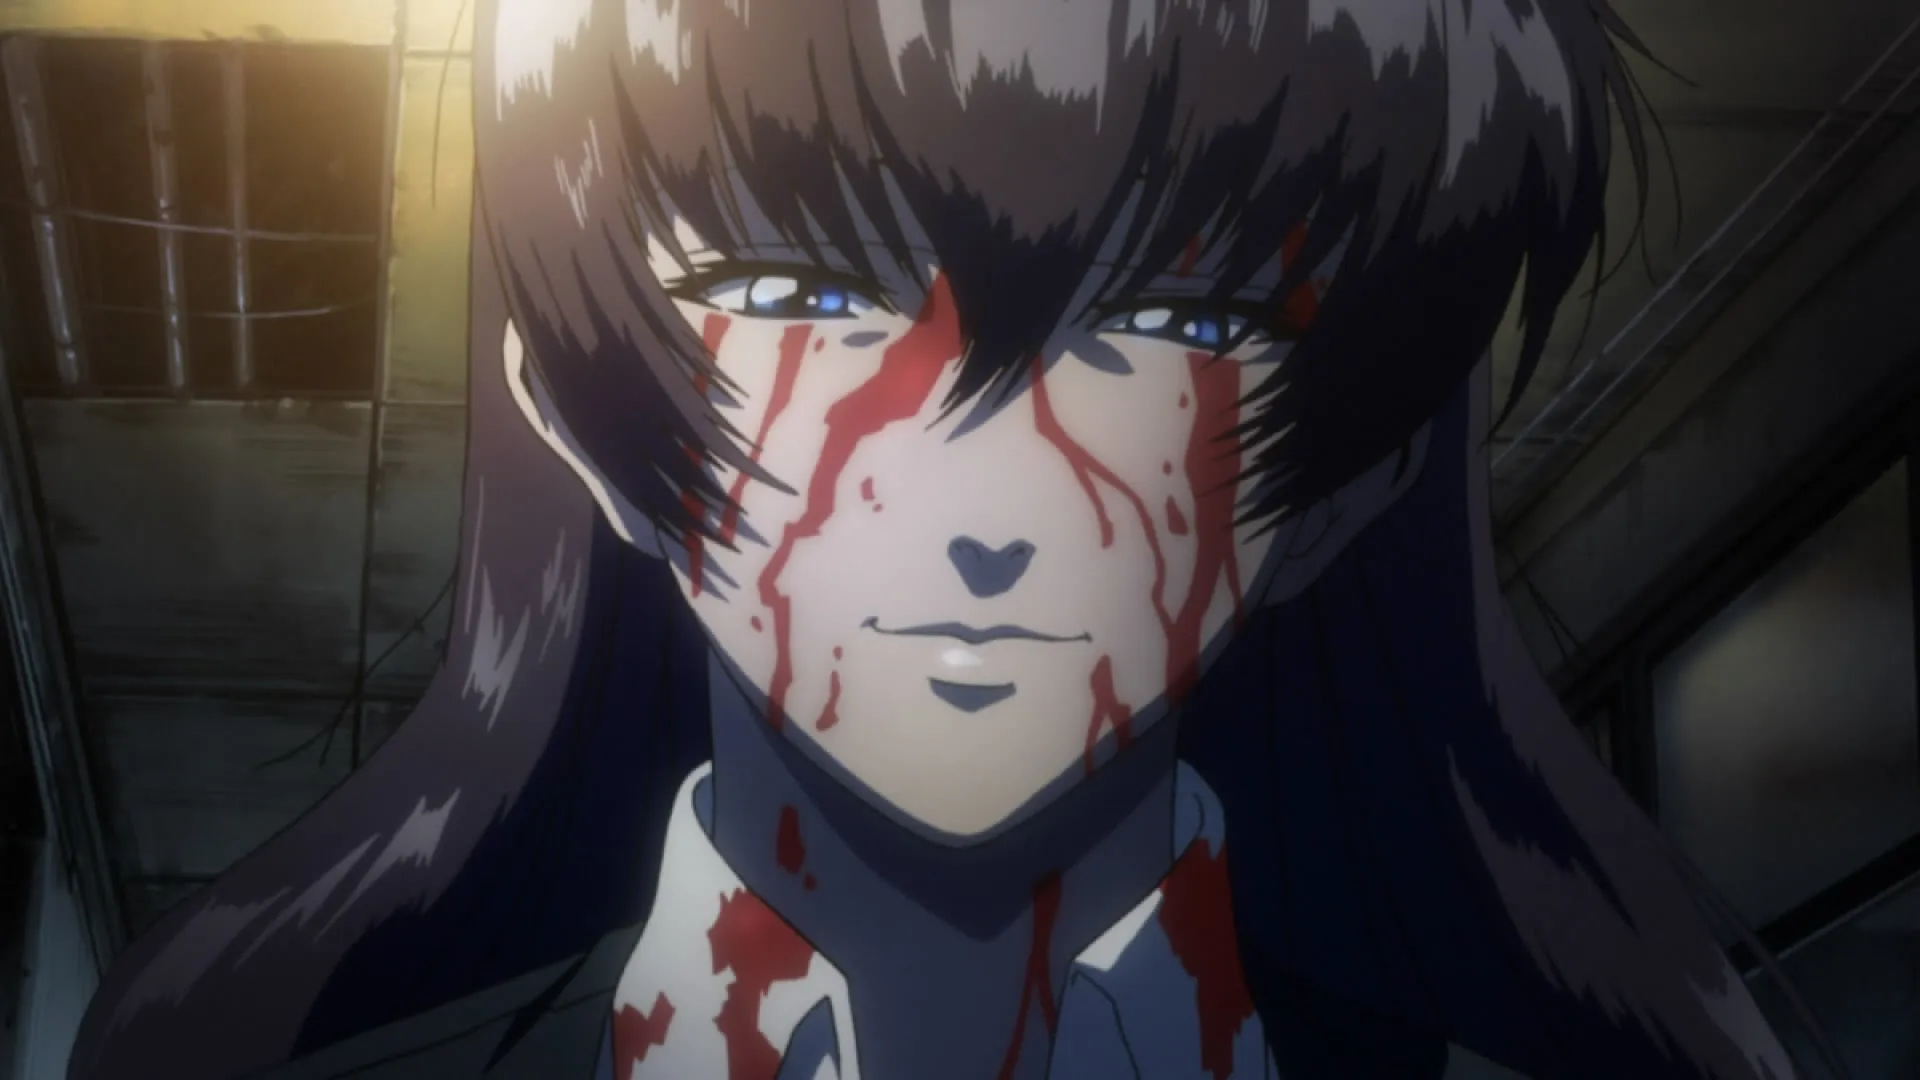 Roberta from black lagoon covered in blood (Madhouse)